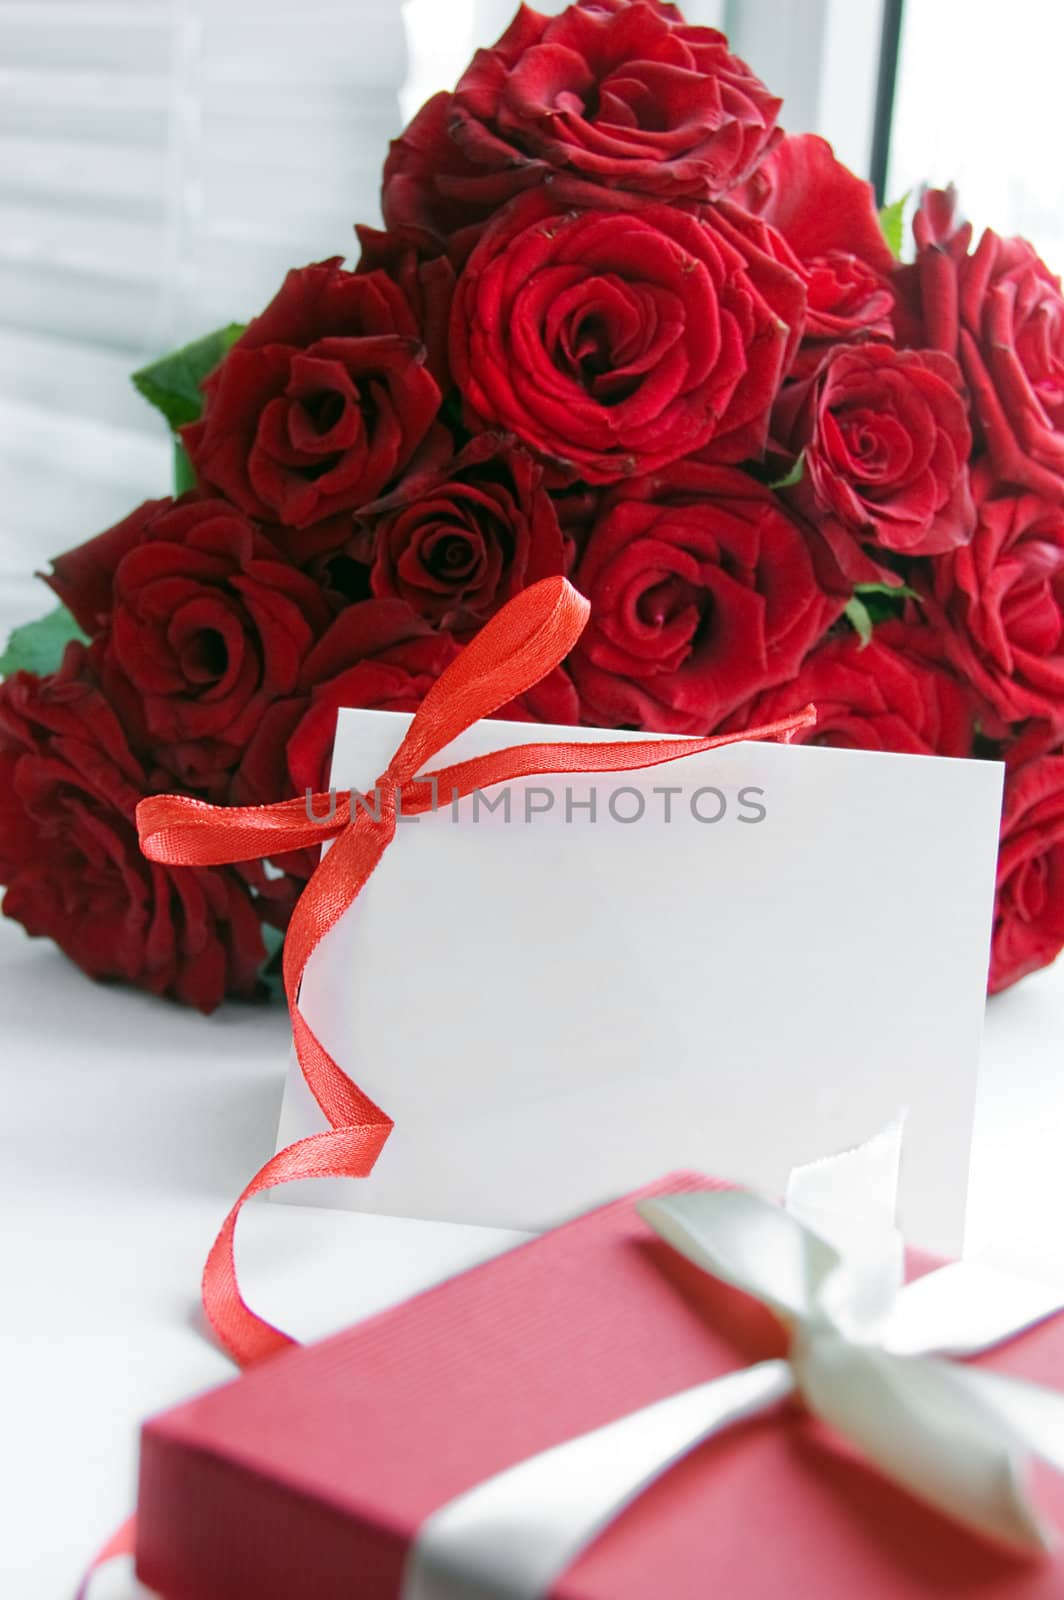 Blank note for message over bunch of red roses